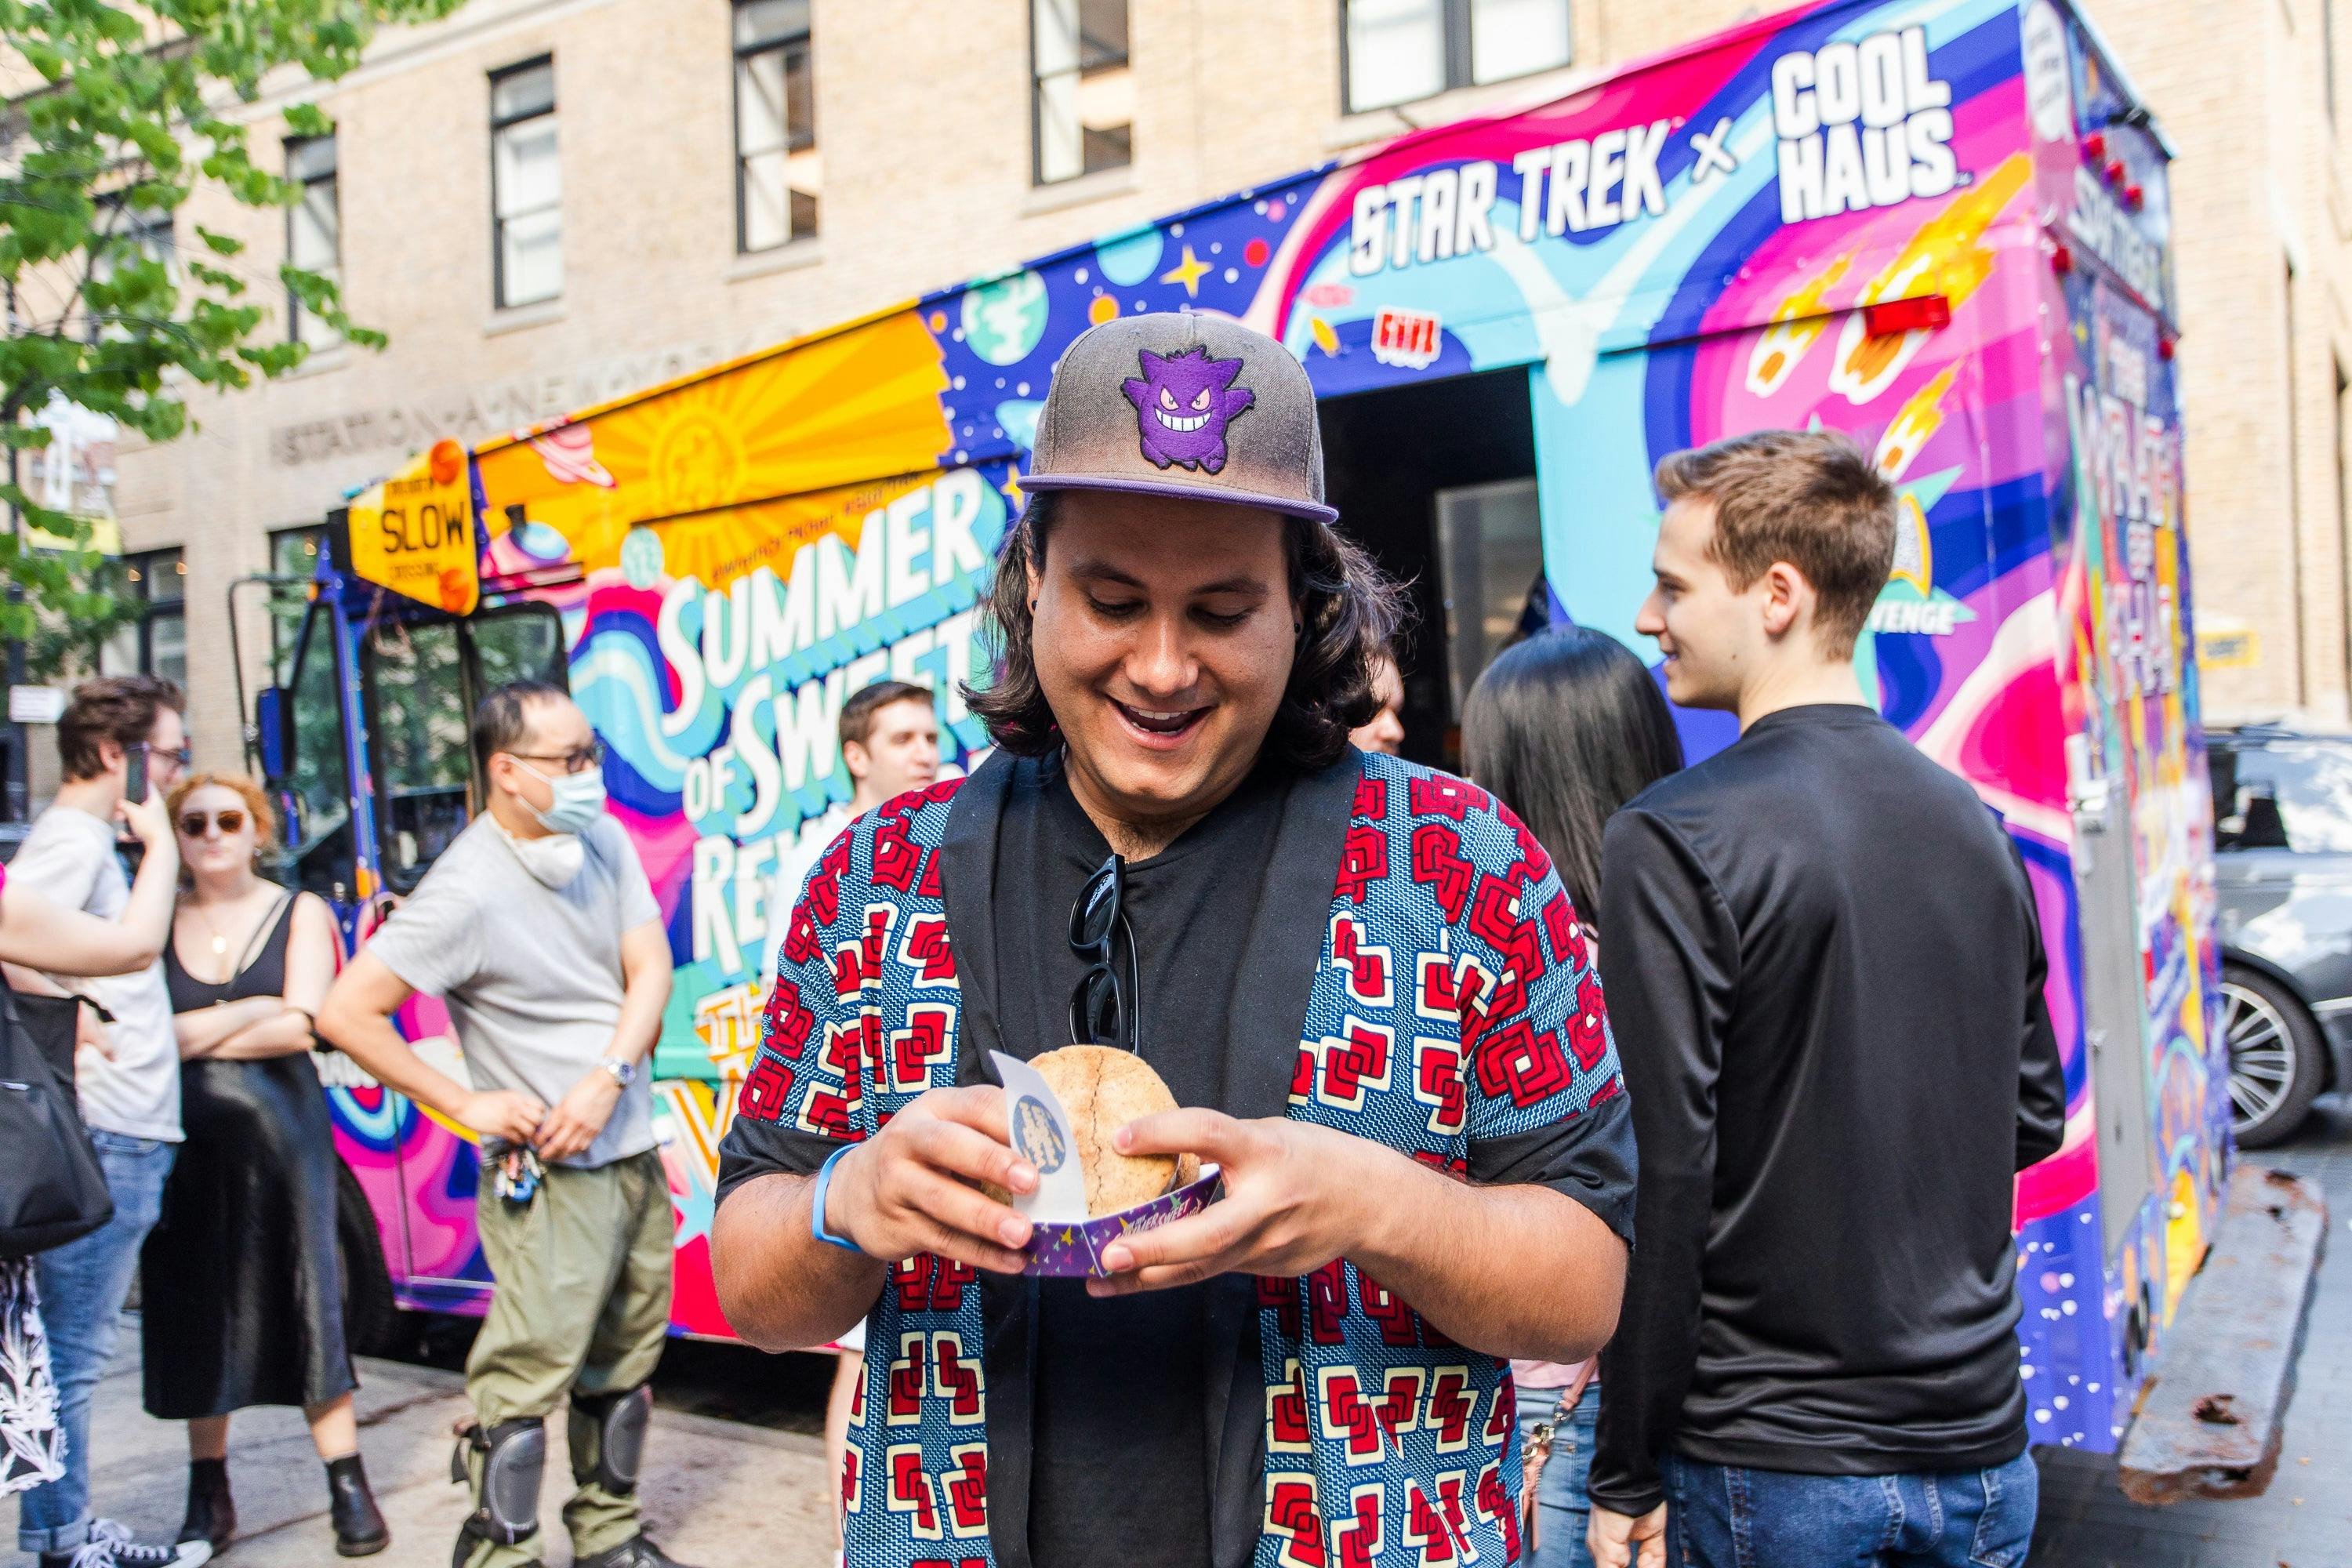 A man in a baseball hat looks excitedly at his ice cream sandwich.